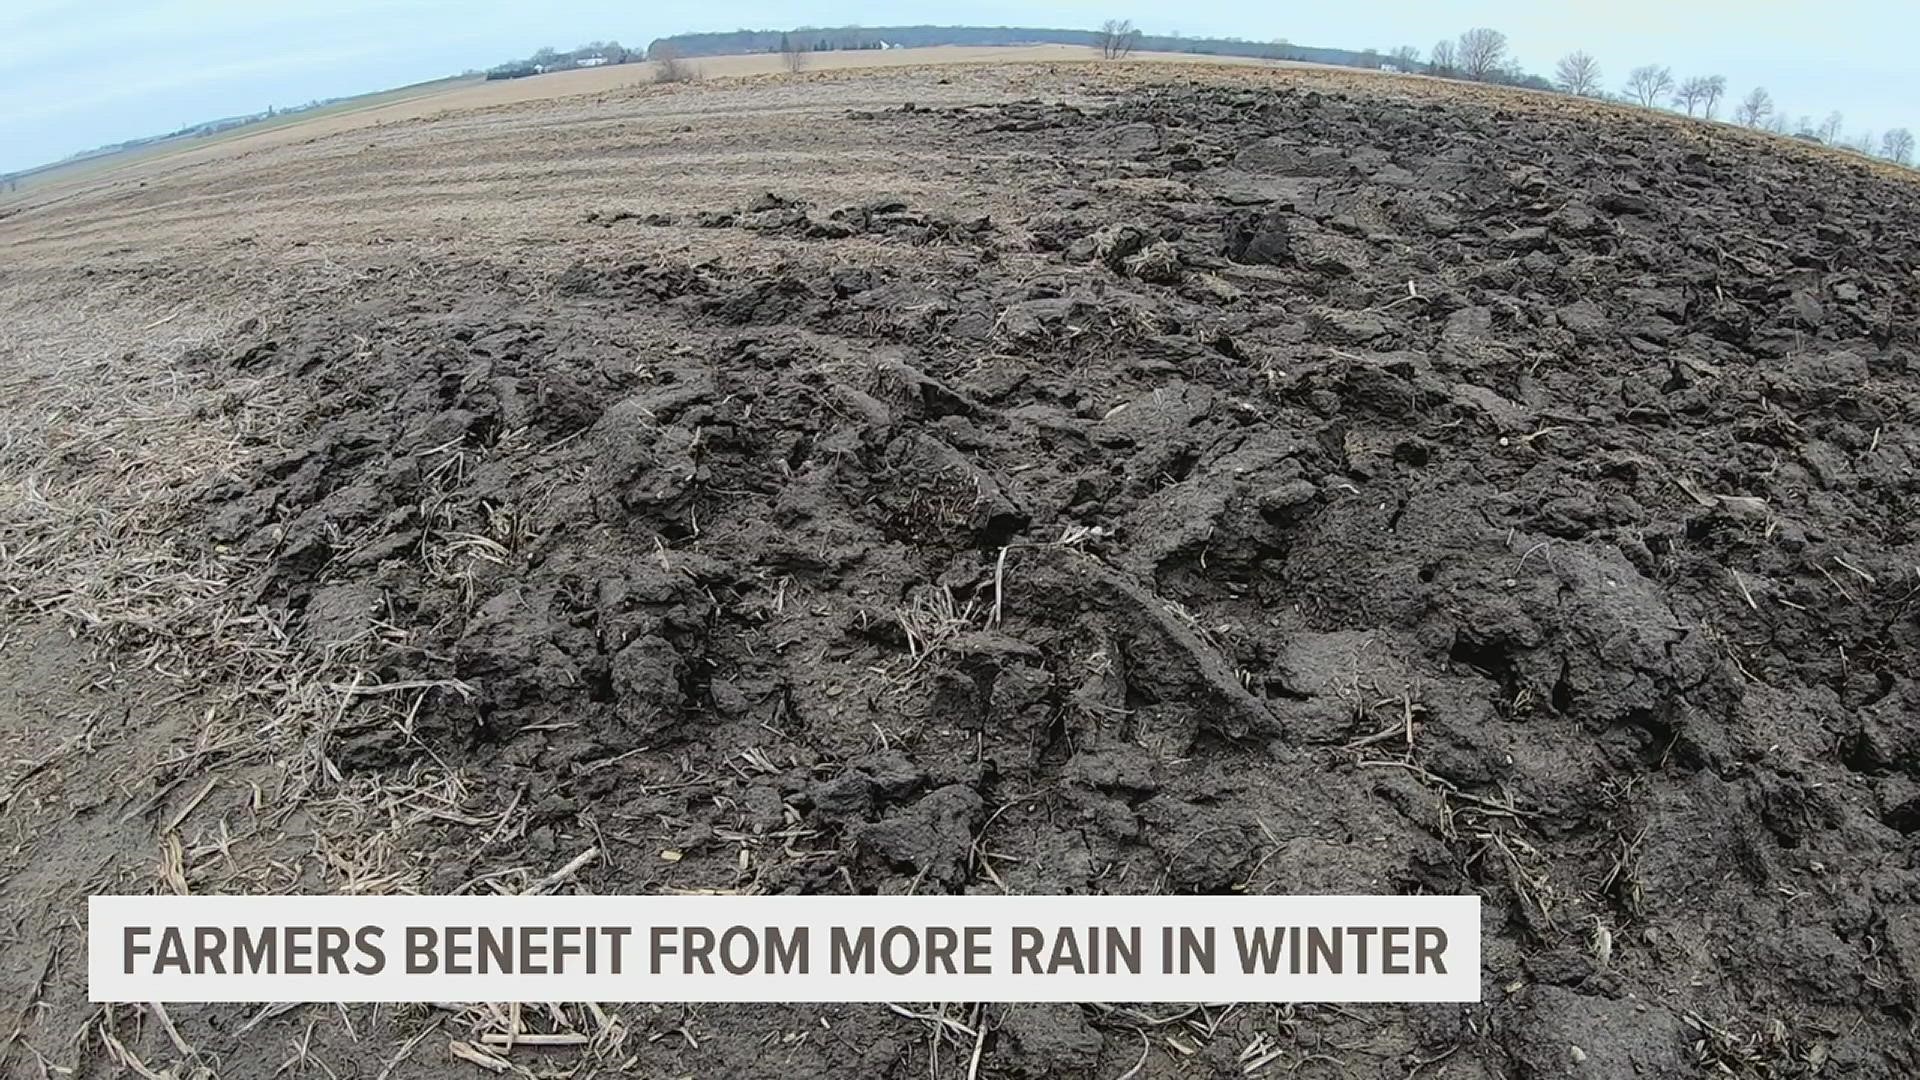 The new year is off to a rainy start in the Quad Cities, and for local farmers, that's a good sign.